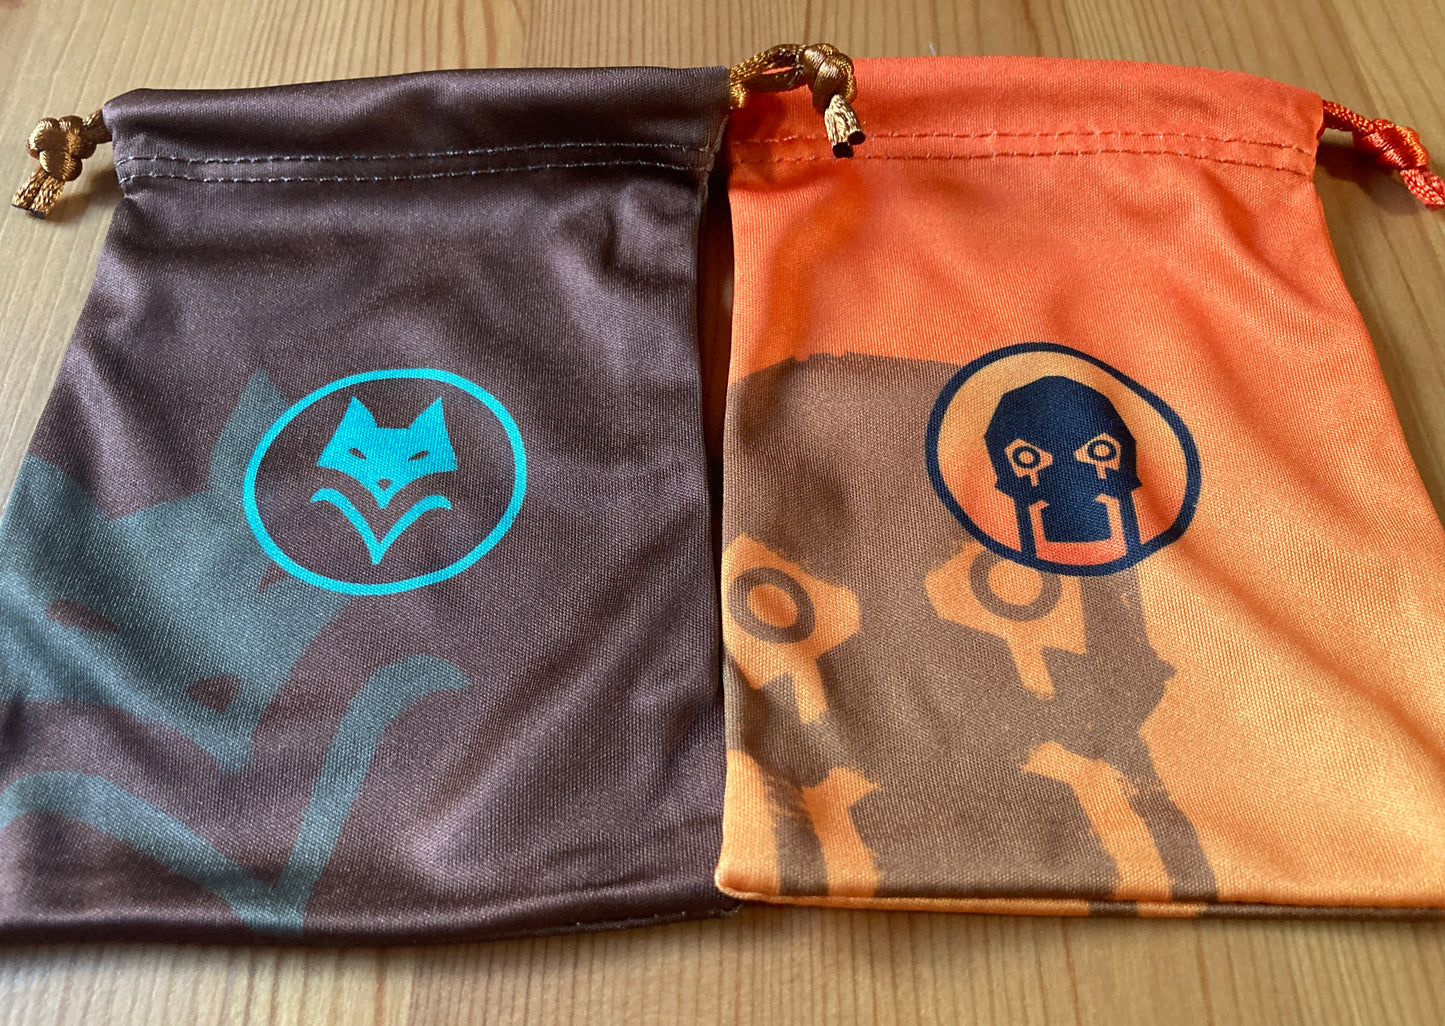 Closer angle view of both of the bags included with this Scythe 2 Rise of Fenris Expansion Bags accessory.